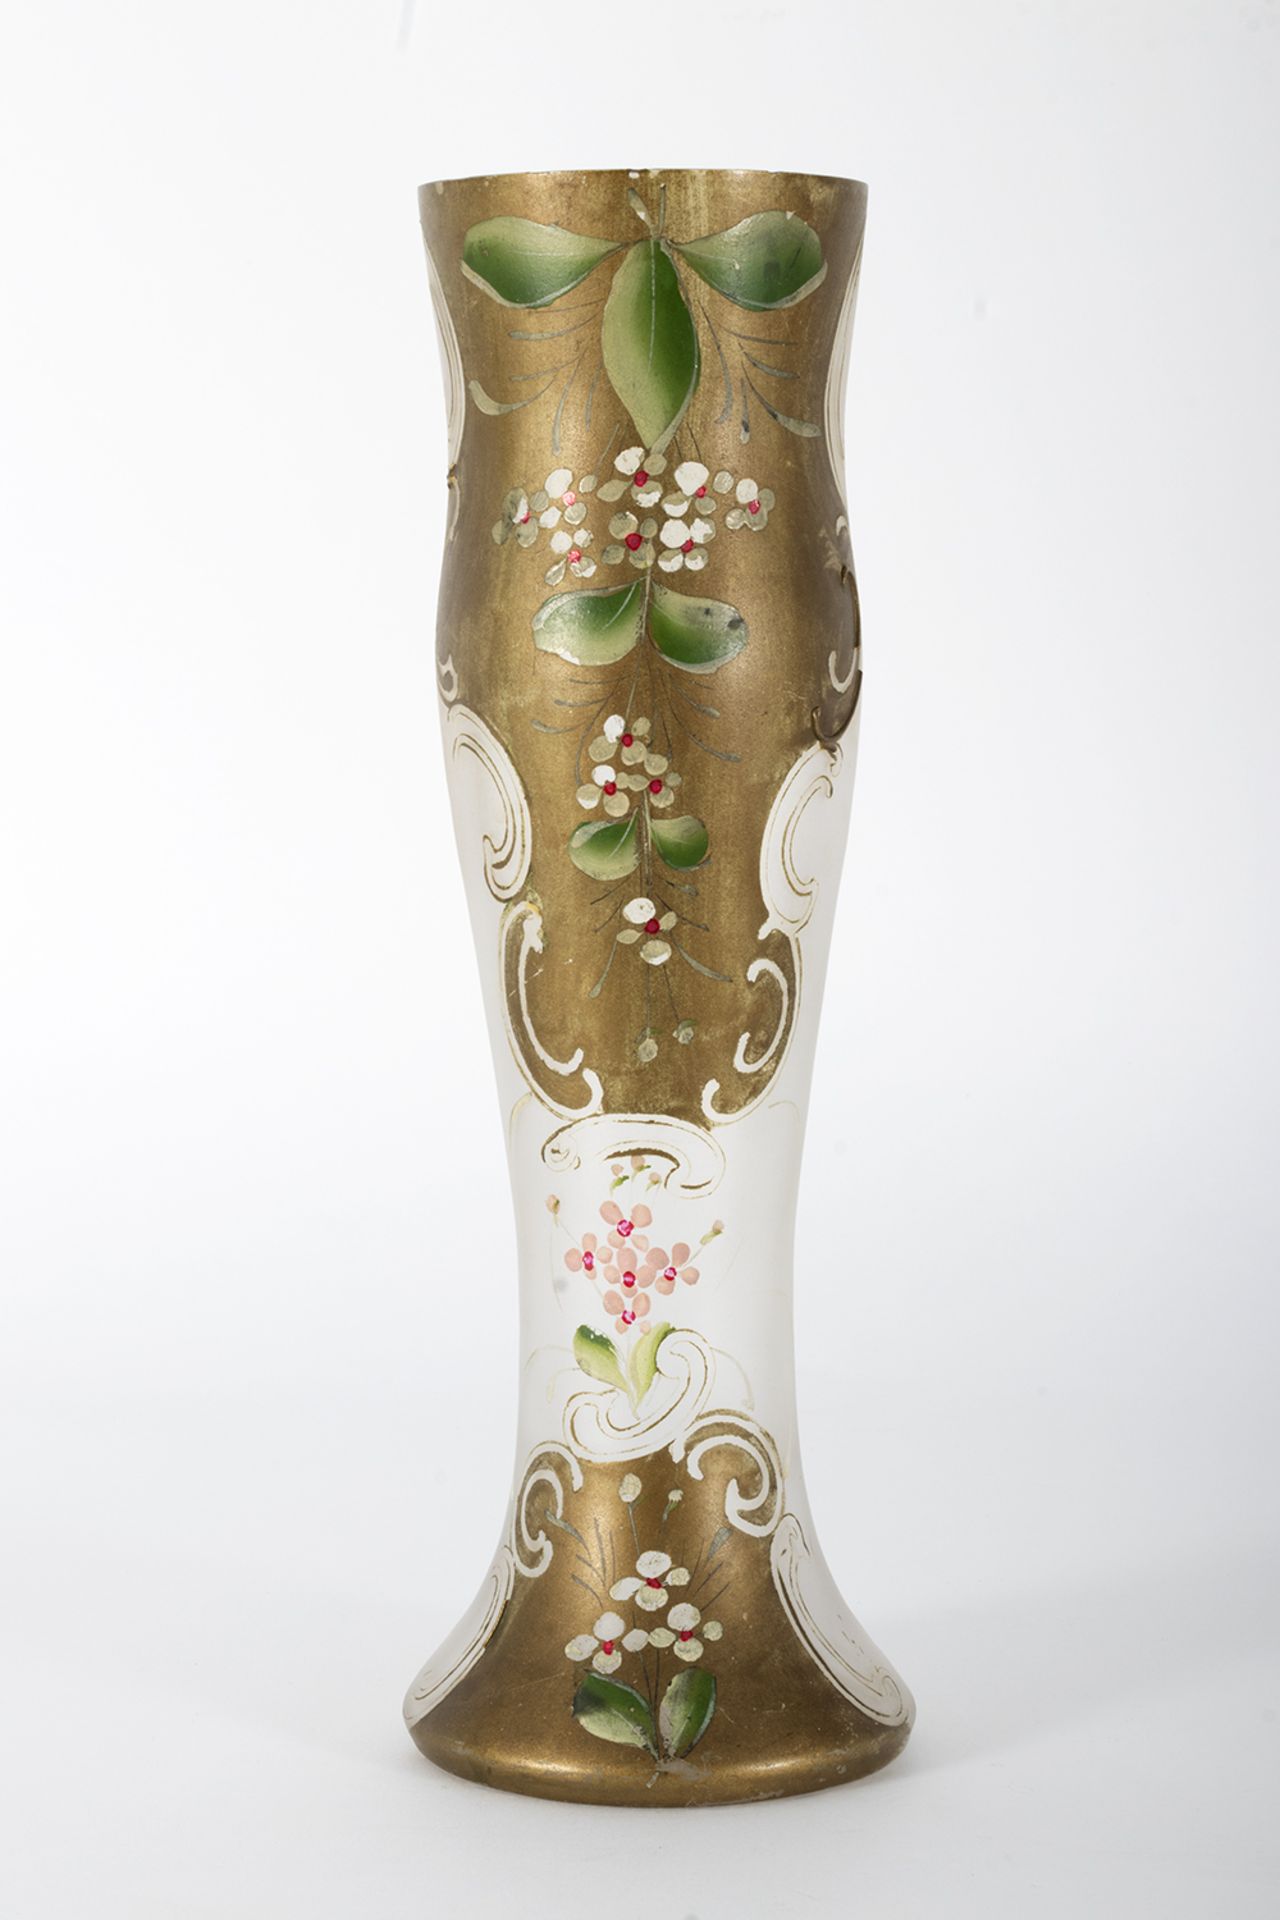 Art Nouveau vase in enamelled and gilded glass with floral decoration.